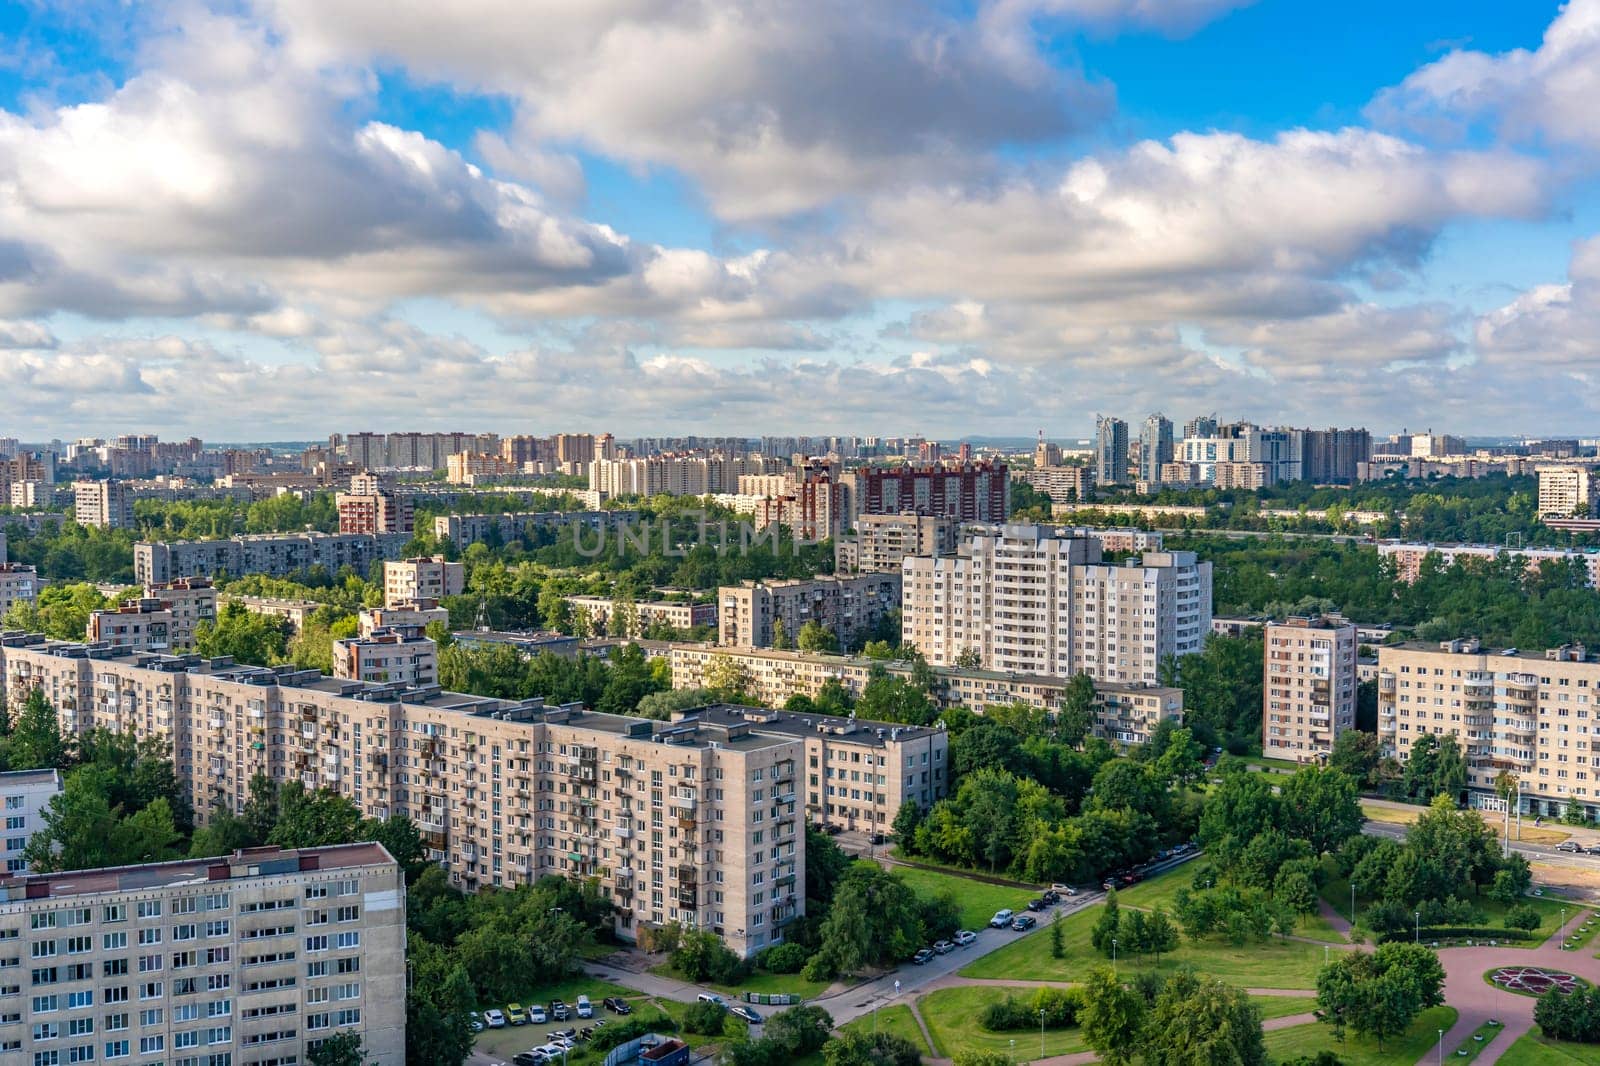 Residential area Saint Petersburg on a summer day